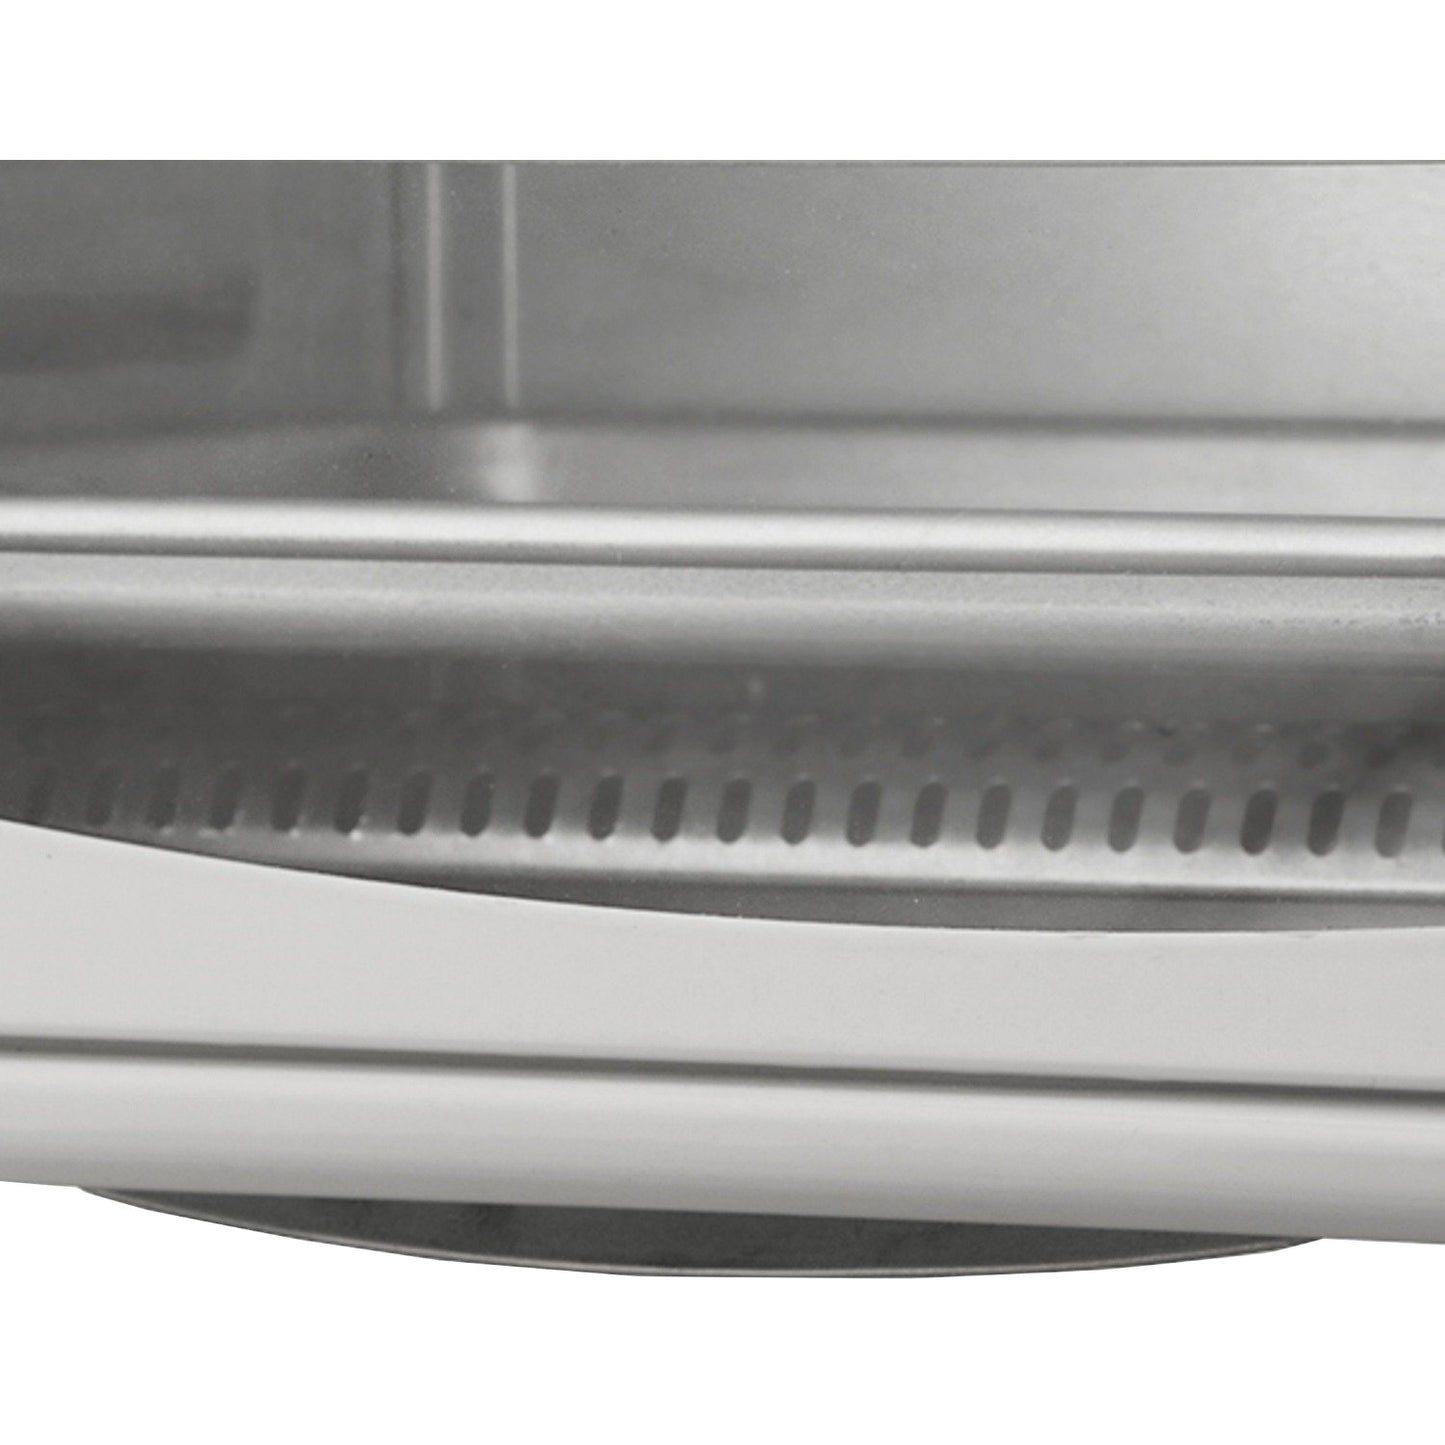 Brentwood Appl. TS-345W 4-Slice Toaster Oven